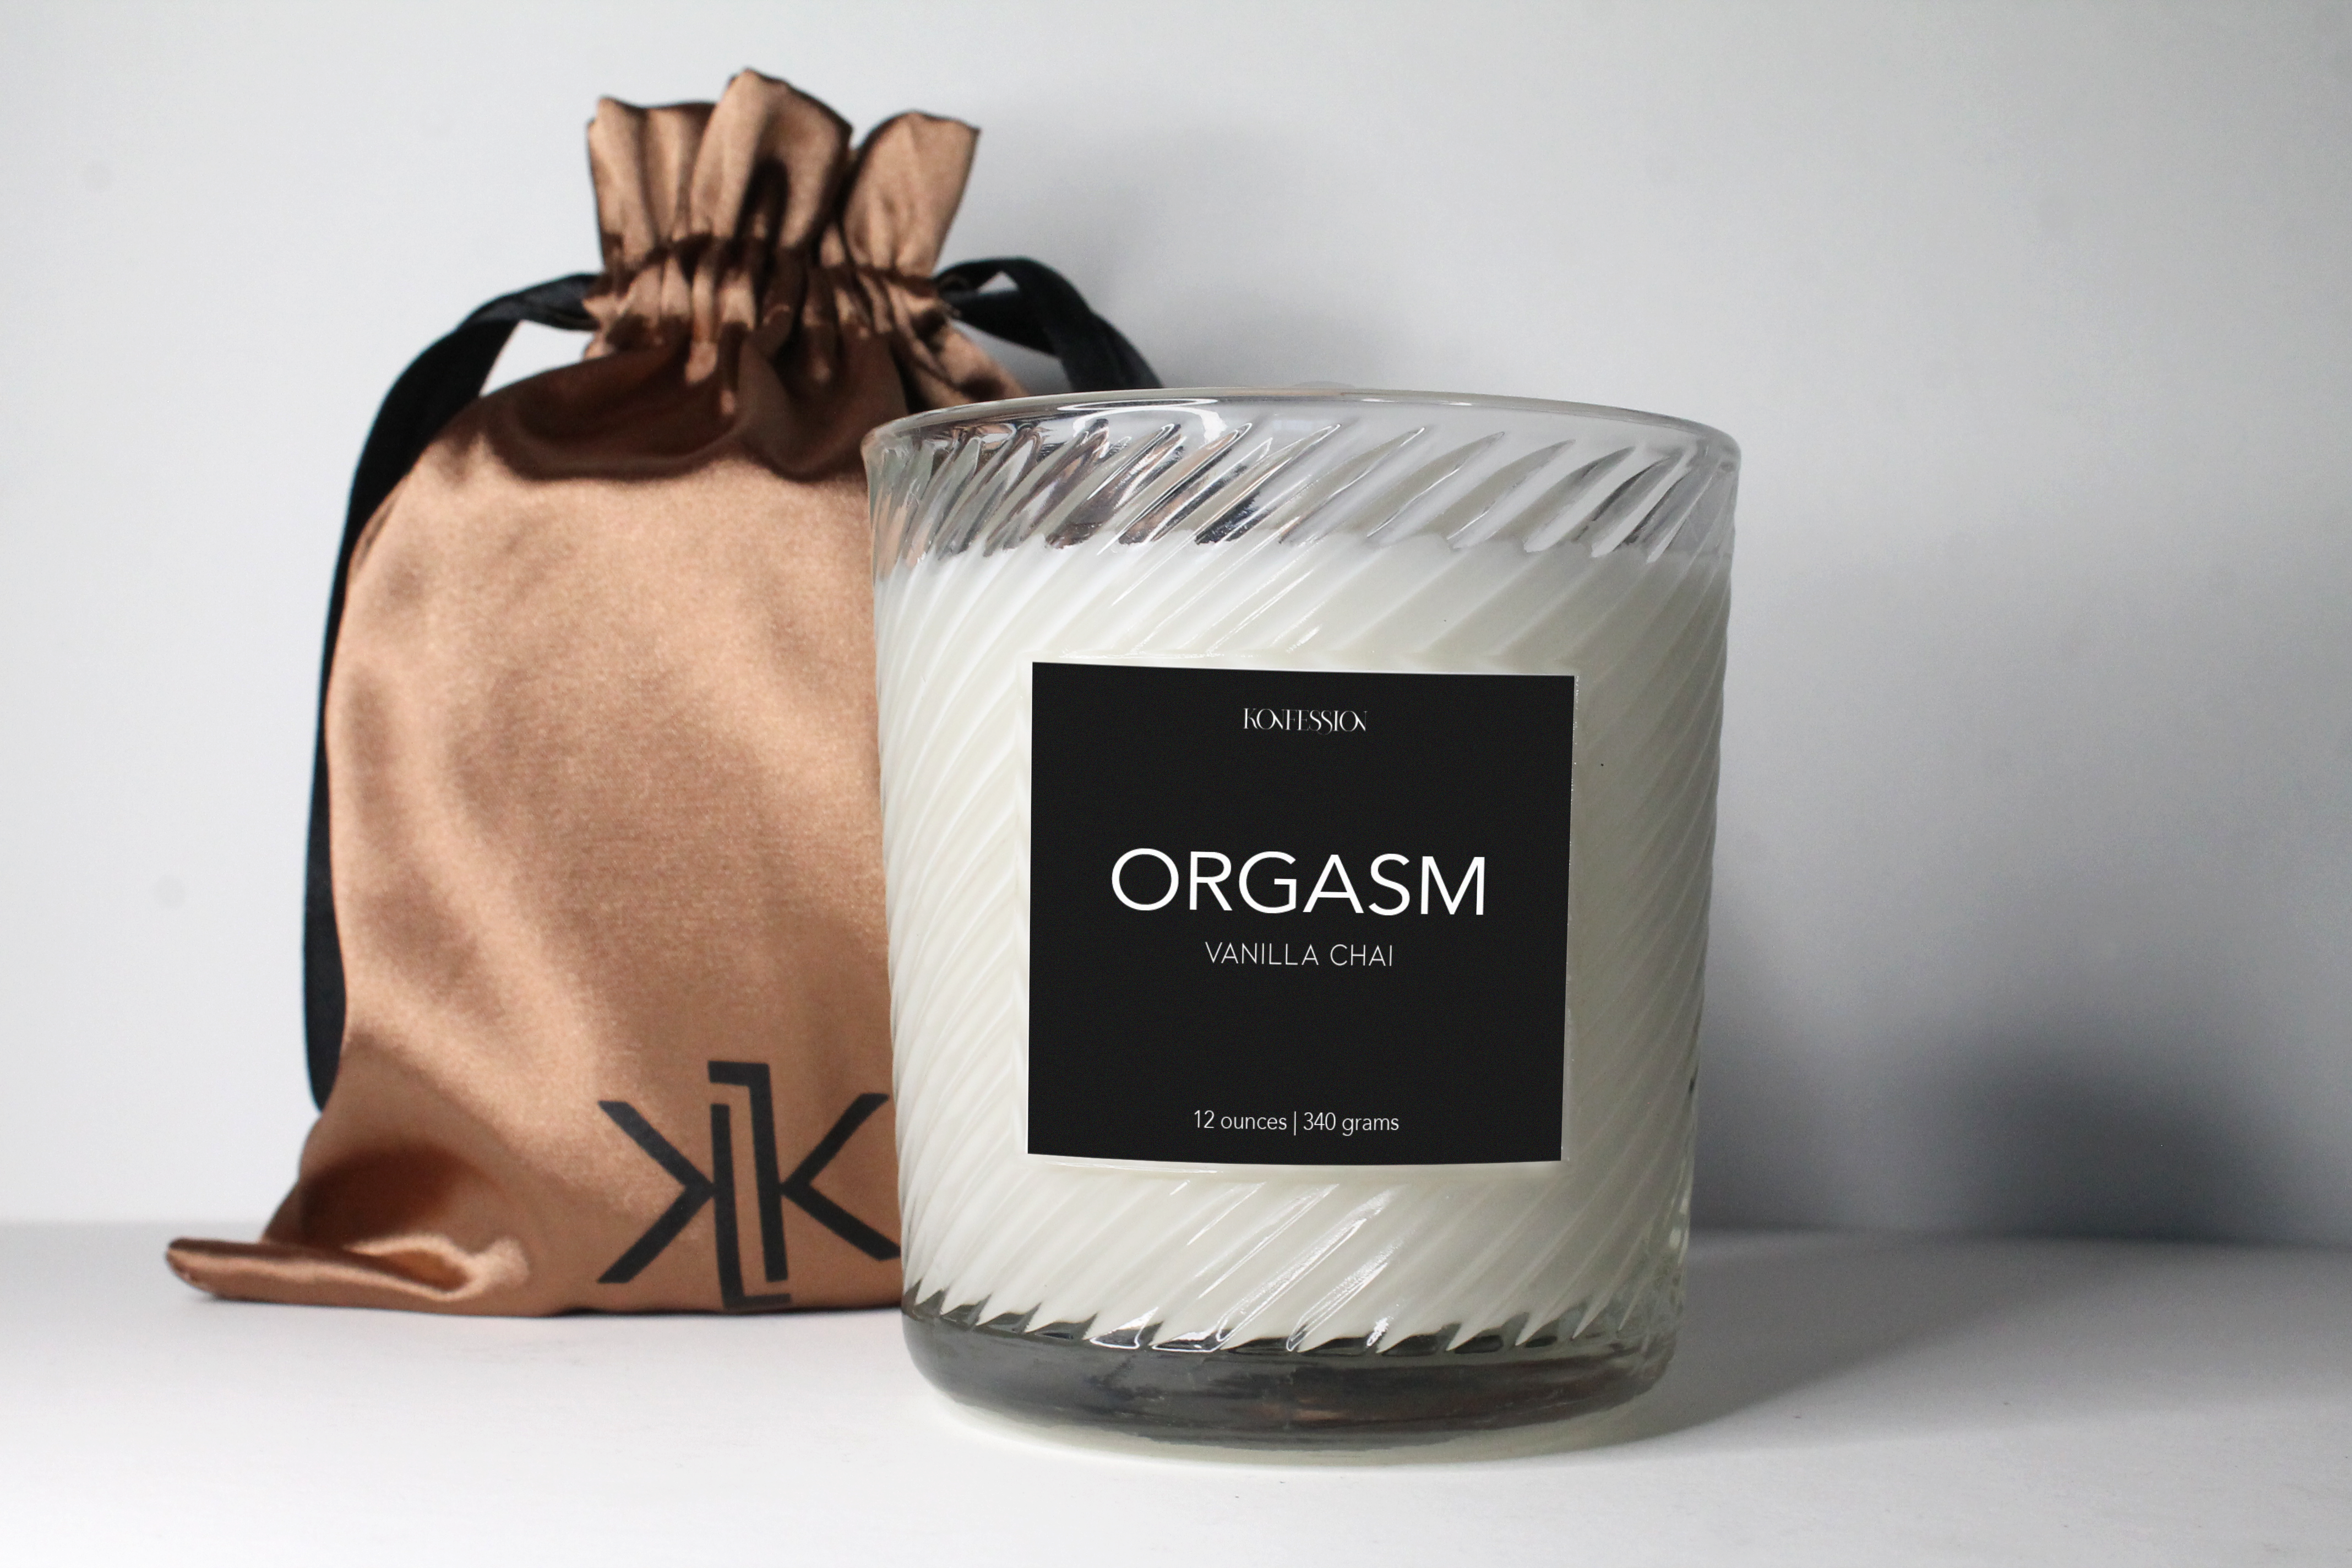 Orgasm candle is in scent vanilla chai. Places in a 12 ounce clear ribbed candle vessel. Black label and 100% soy wax.